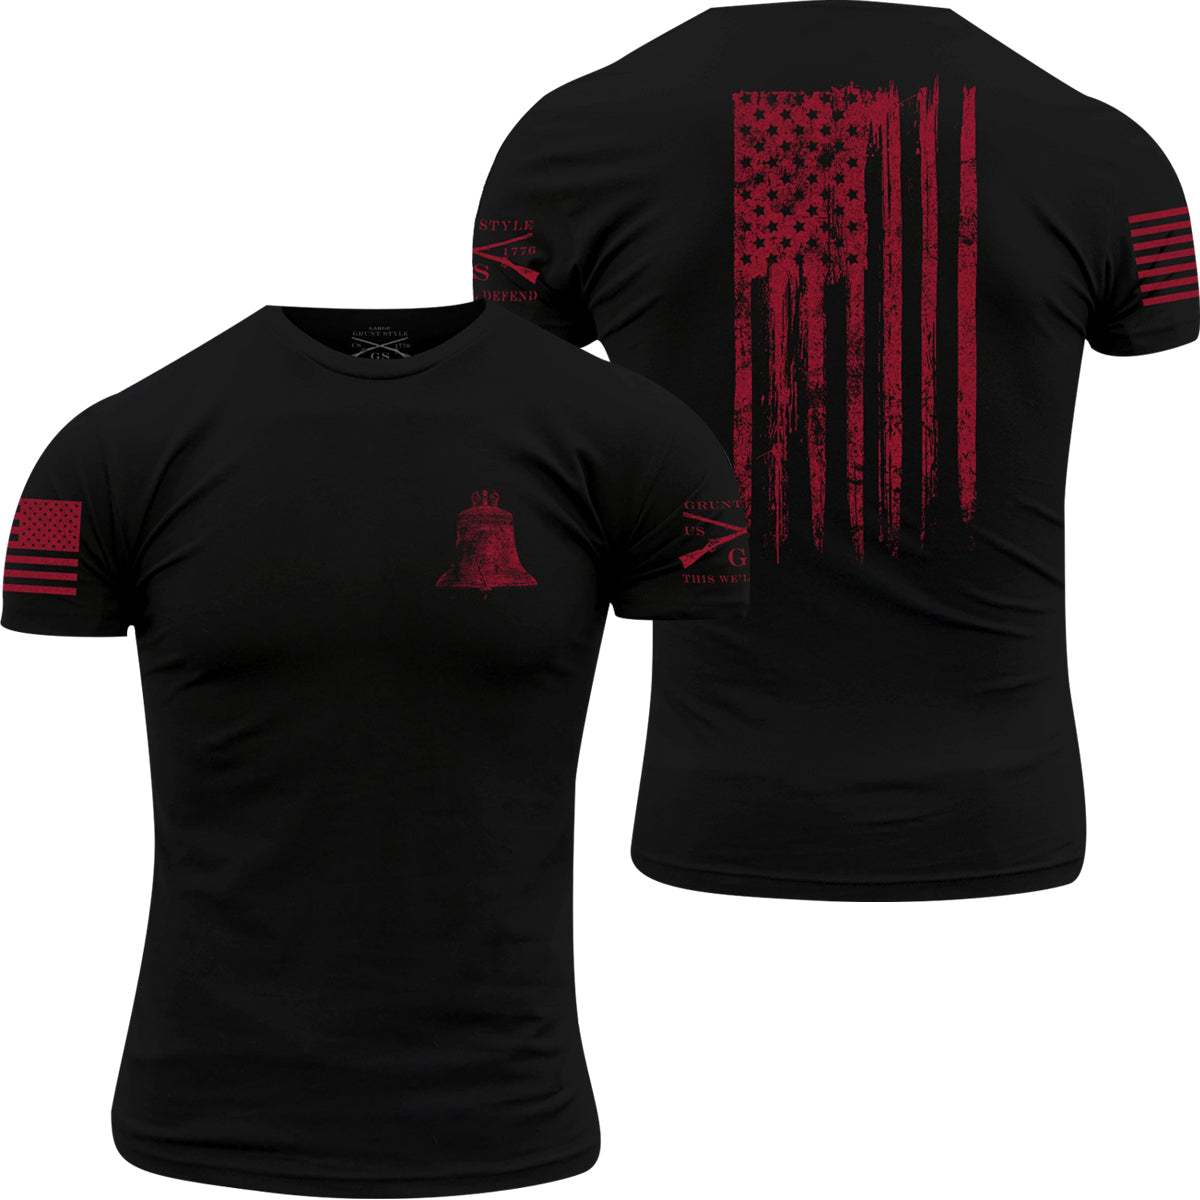 Grunt Style Ink of Liberty T-Shirt - Black Grunt Style